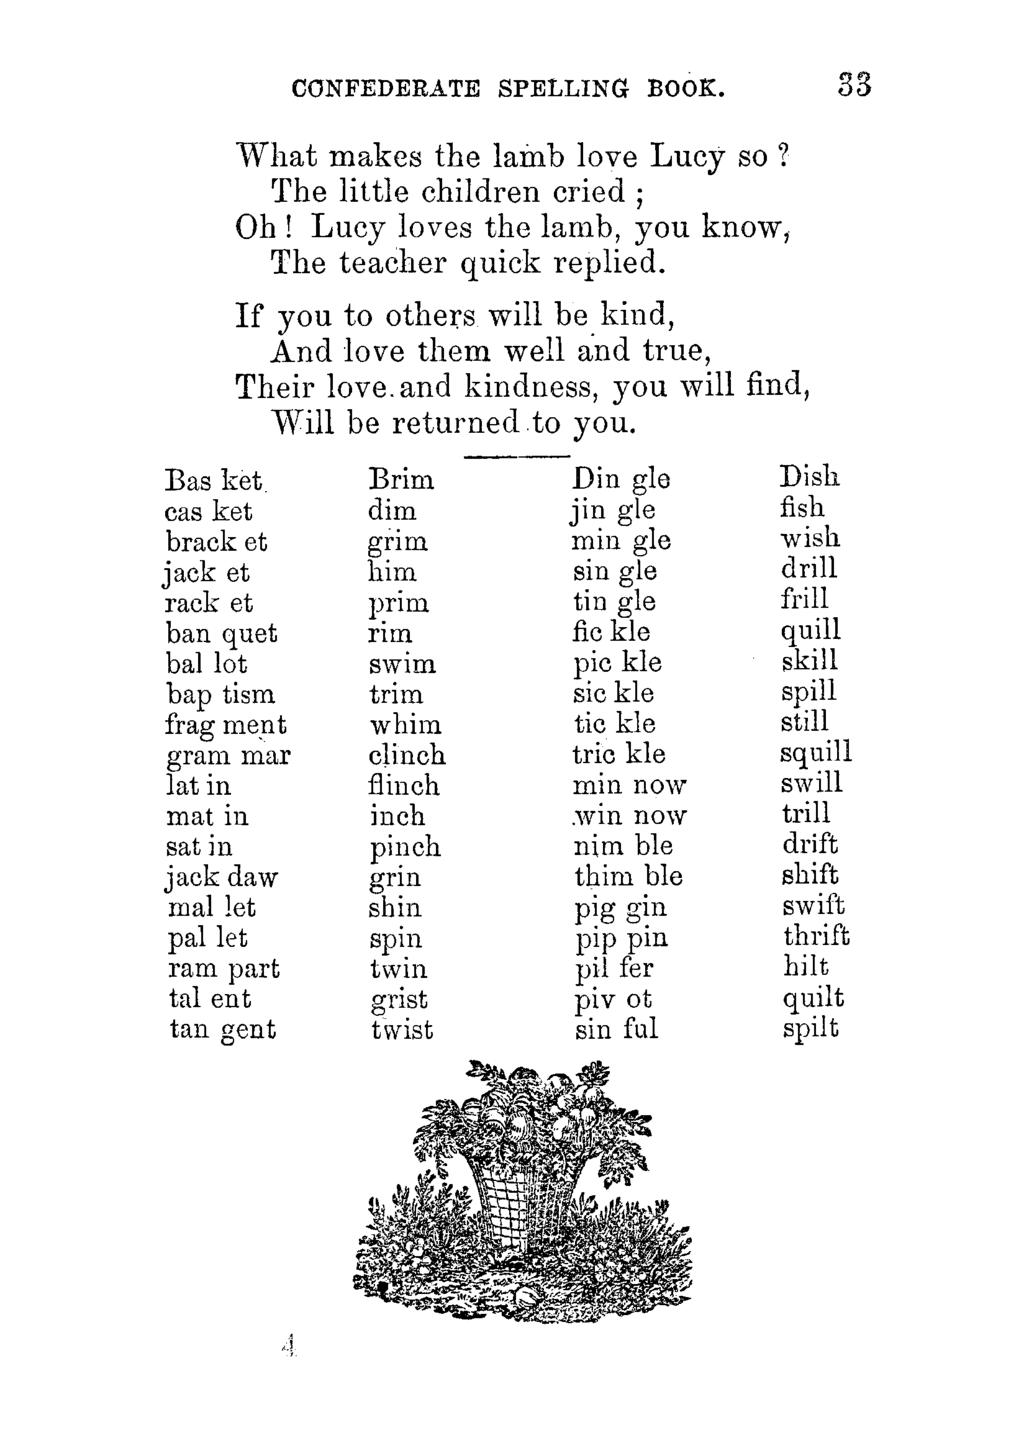 CONFEDERATE SPELLING BOOK. 33 What makes the lamb love Lucy so? The little children cried ; Oh! Lucy loves the lamb, you know, The teacher quick replied.